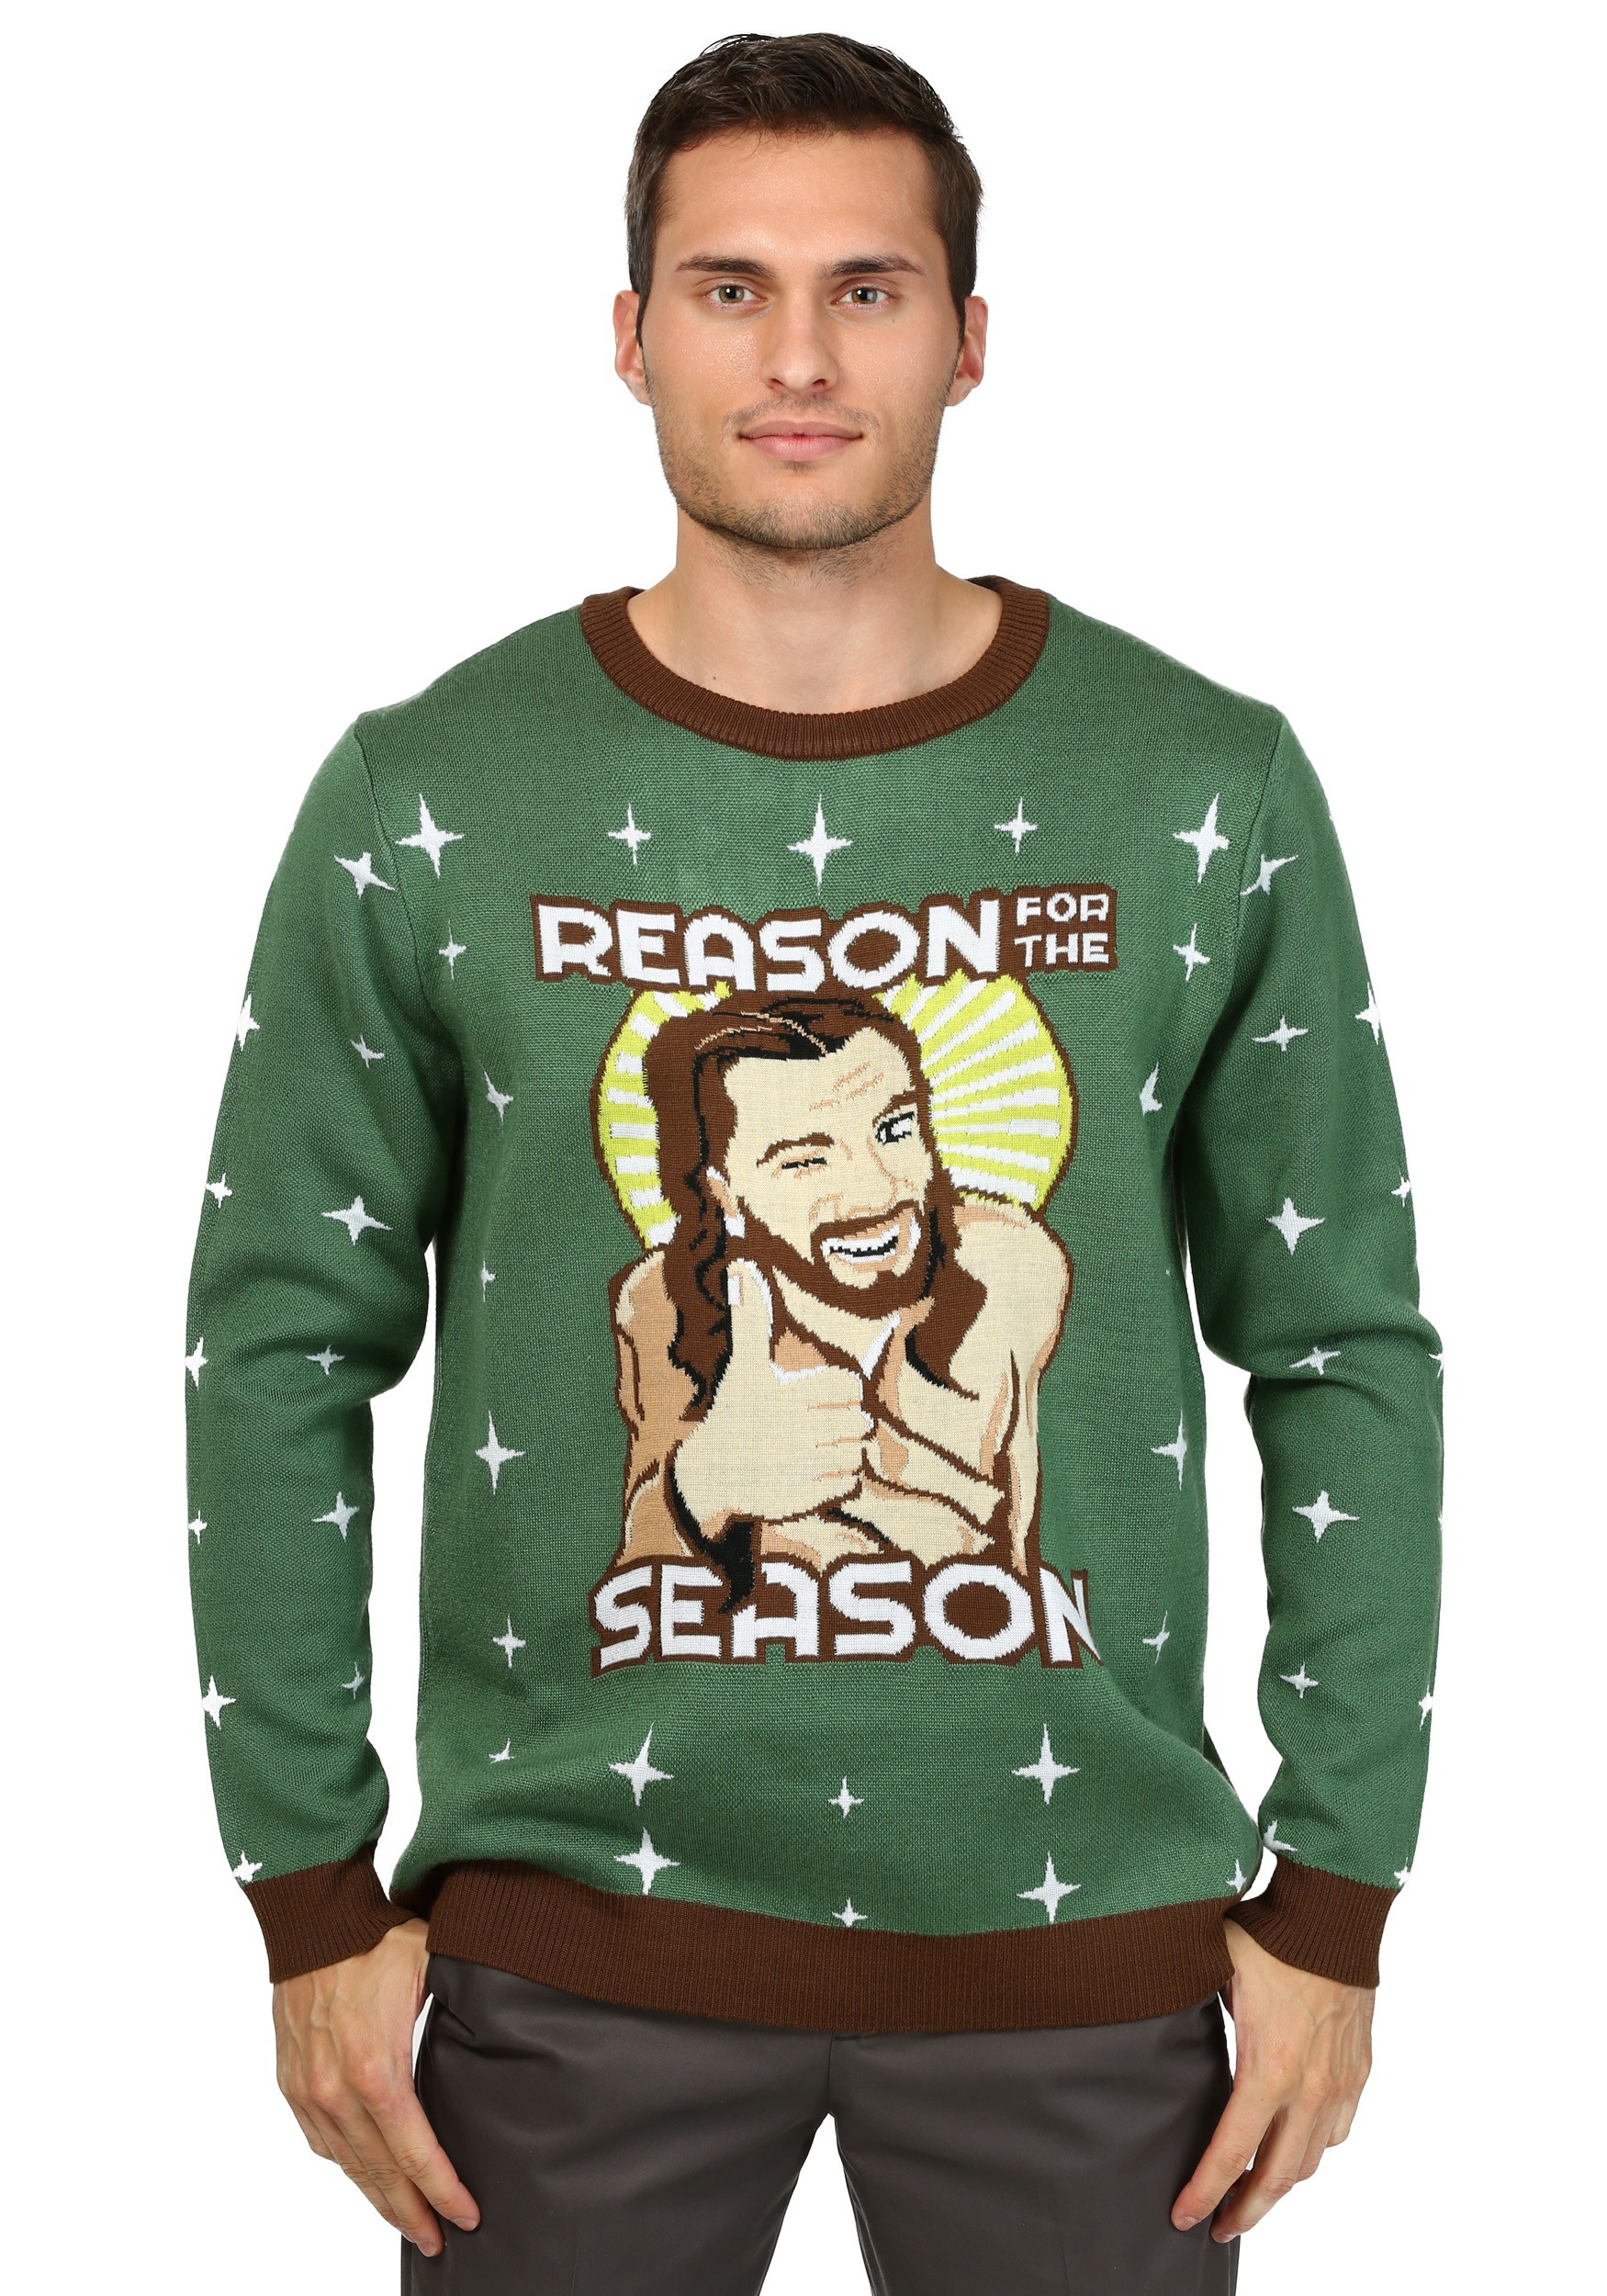 Elbow Patch Sequined Ugly Christmas Sweaters for Men and